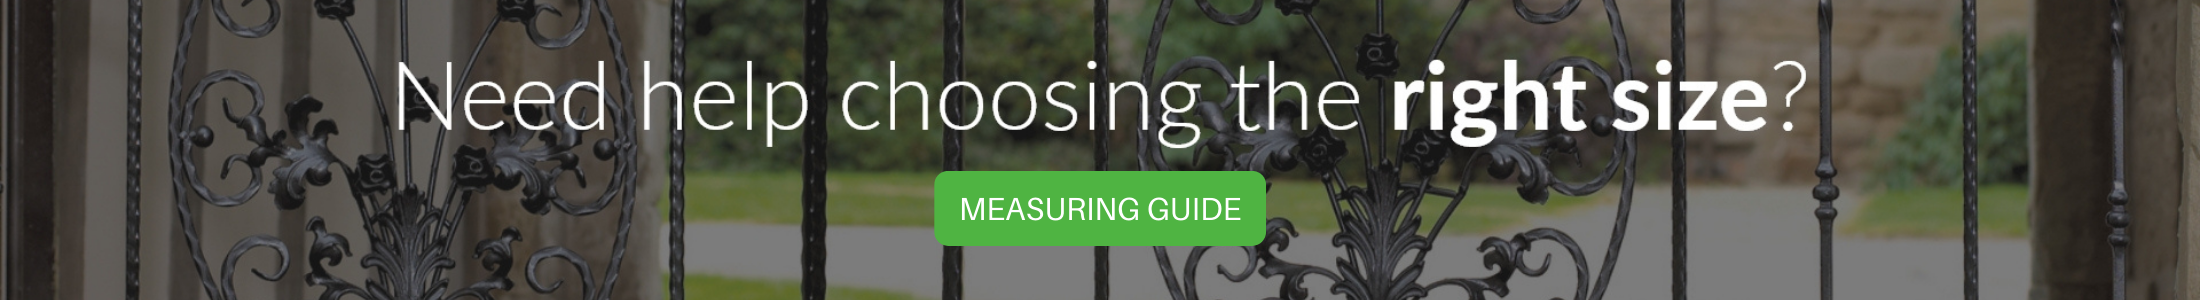 View the measuring guide to discover how to select the correct size